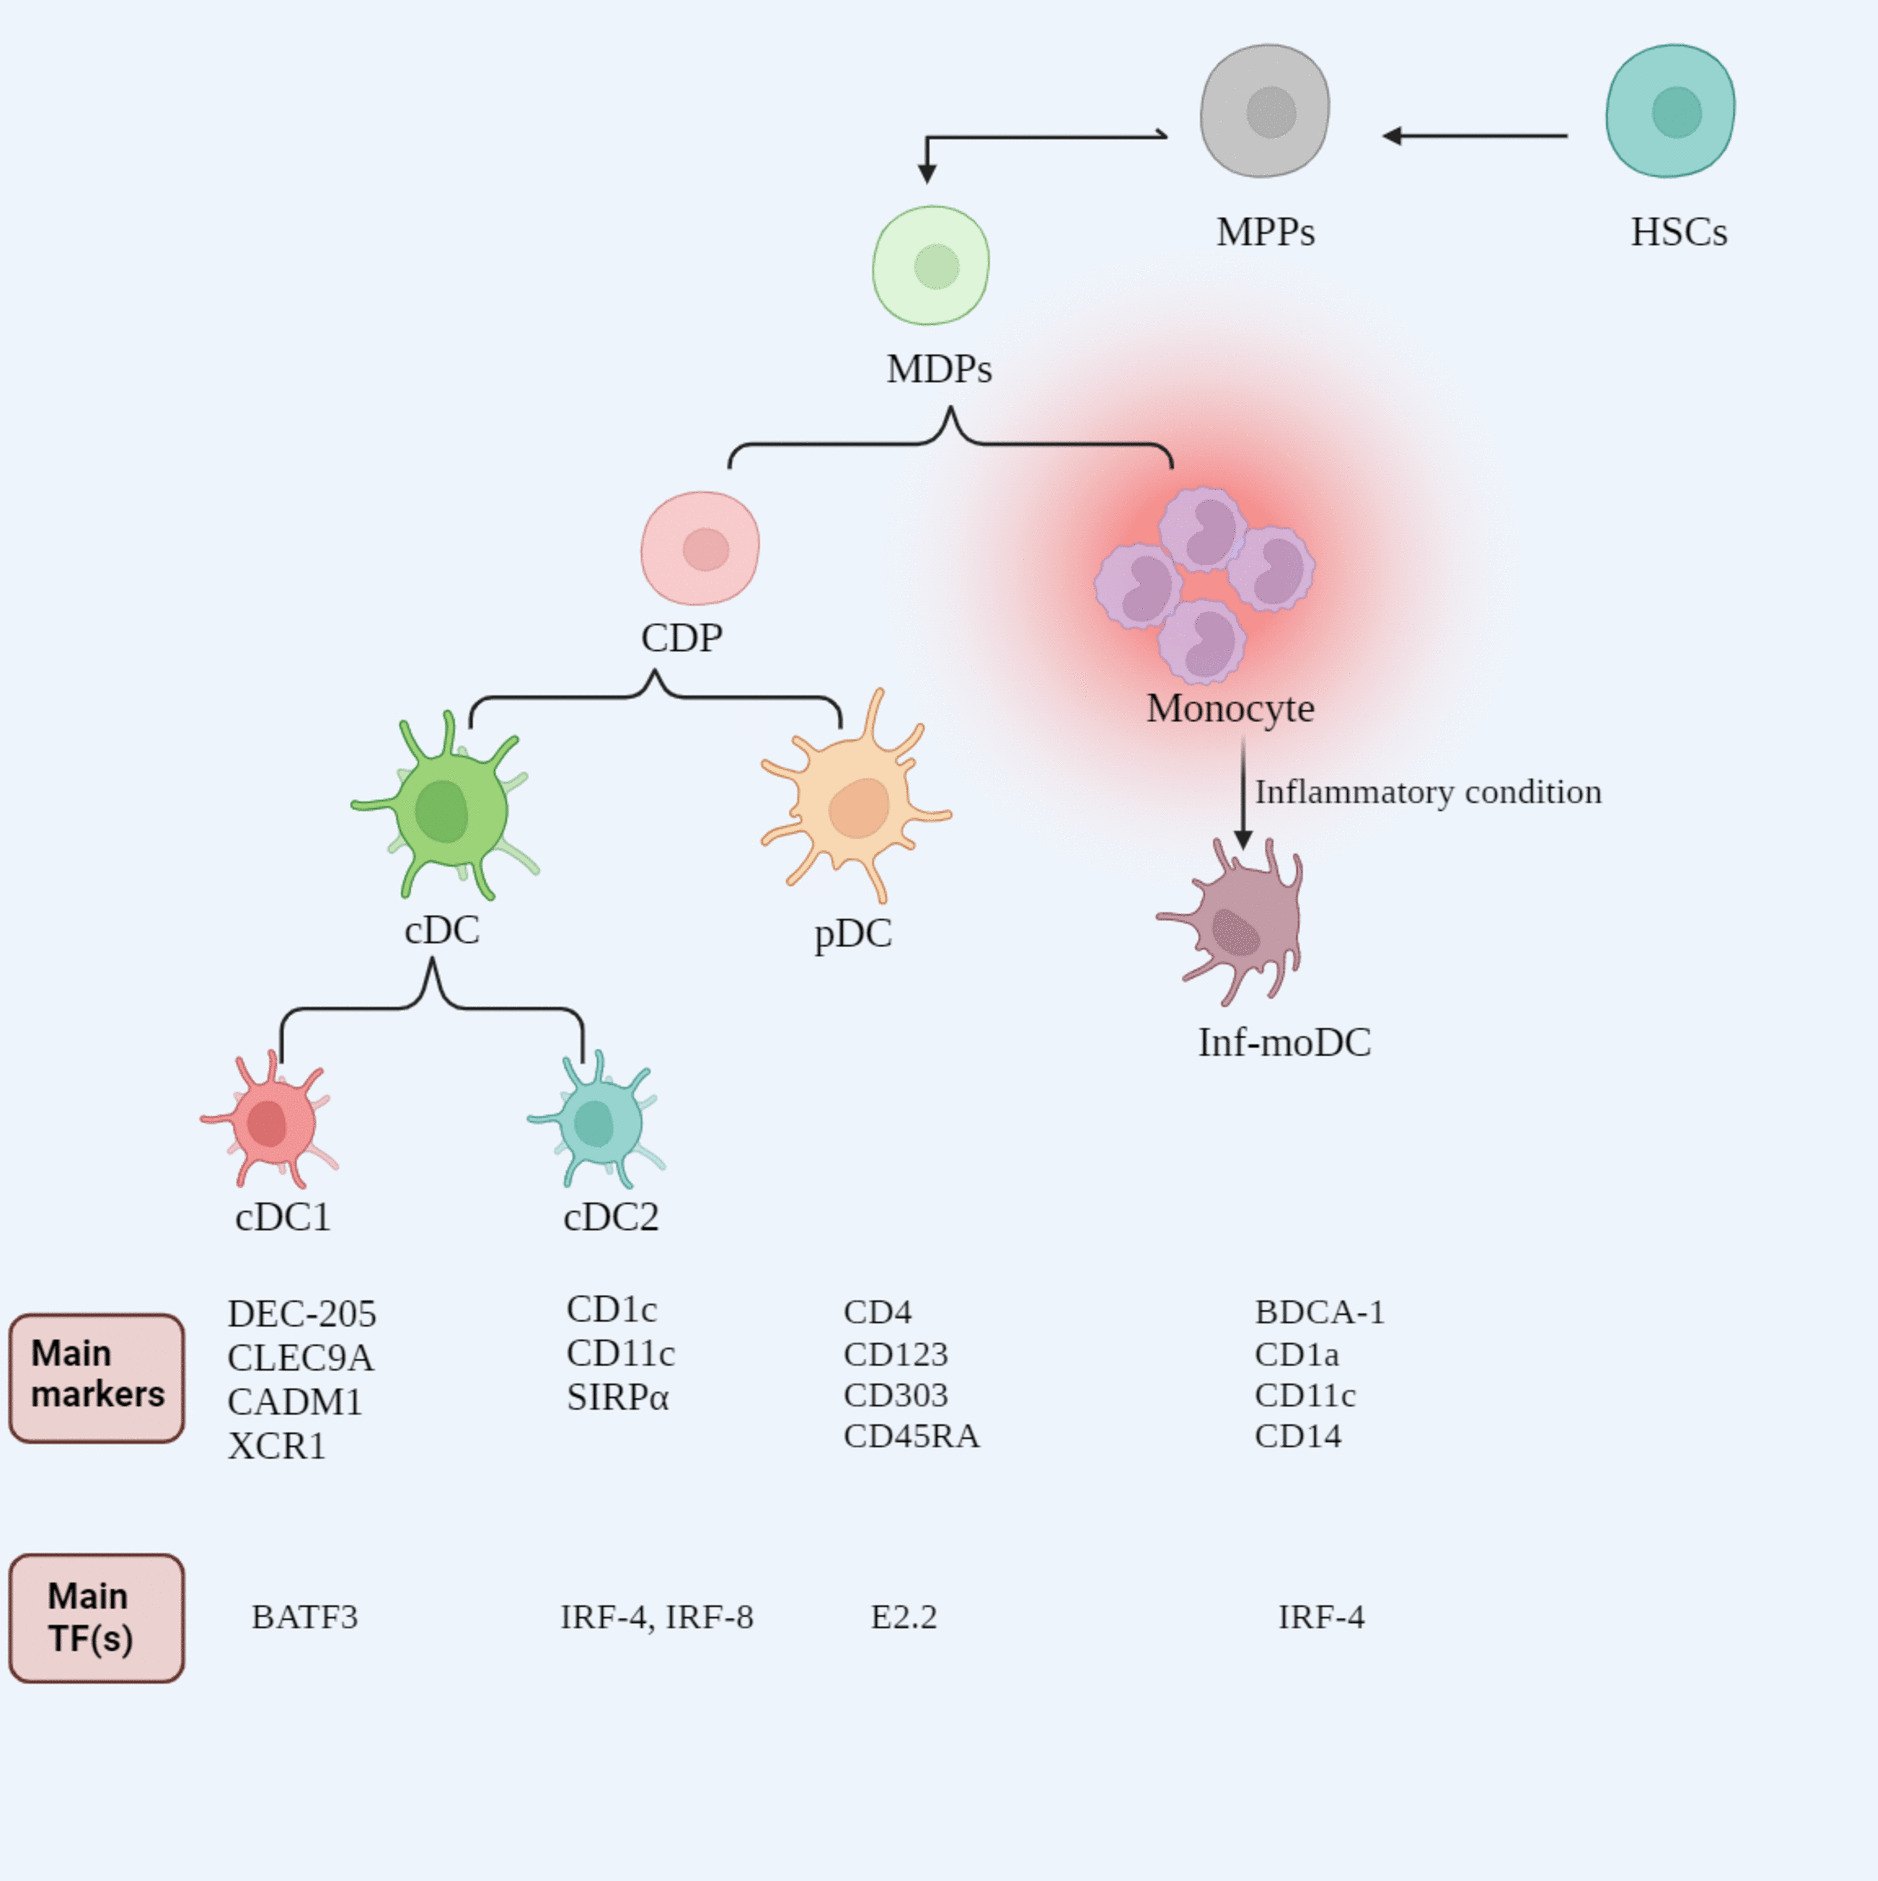 Concise review: The heterogenous roles of BATF3 in cancer oncogenesis and dendritic cells and T cells differentiation and function considering the importance of BATF3-dependent dendritic cells